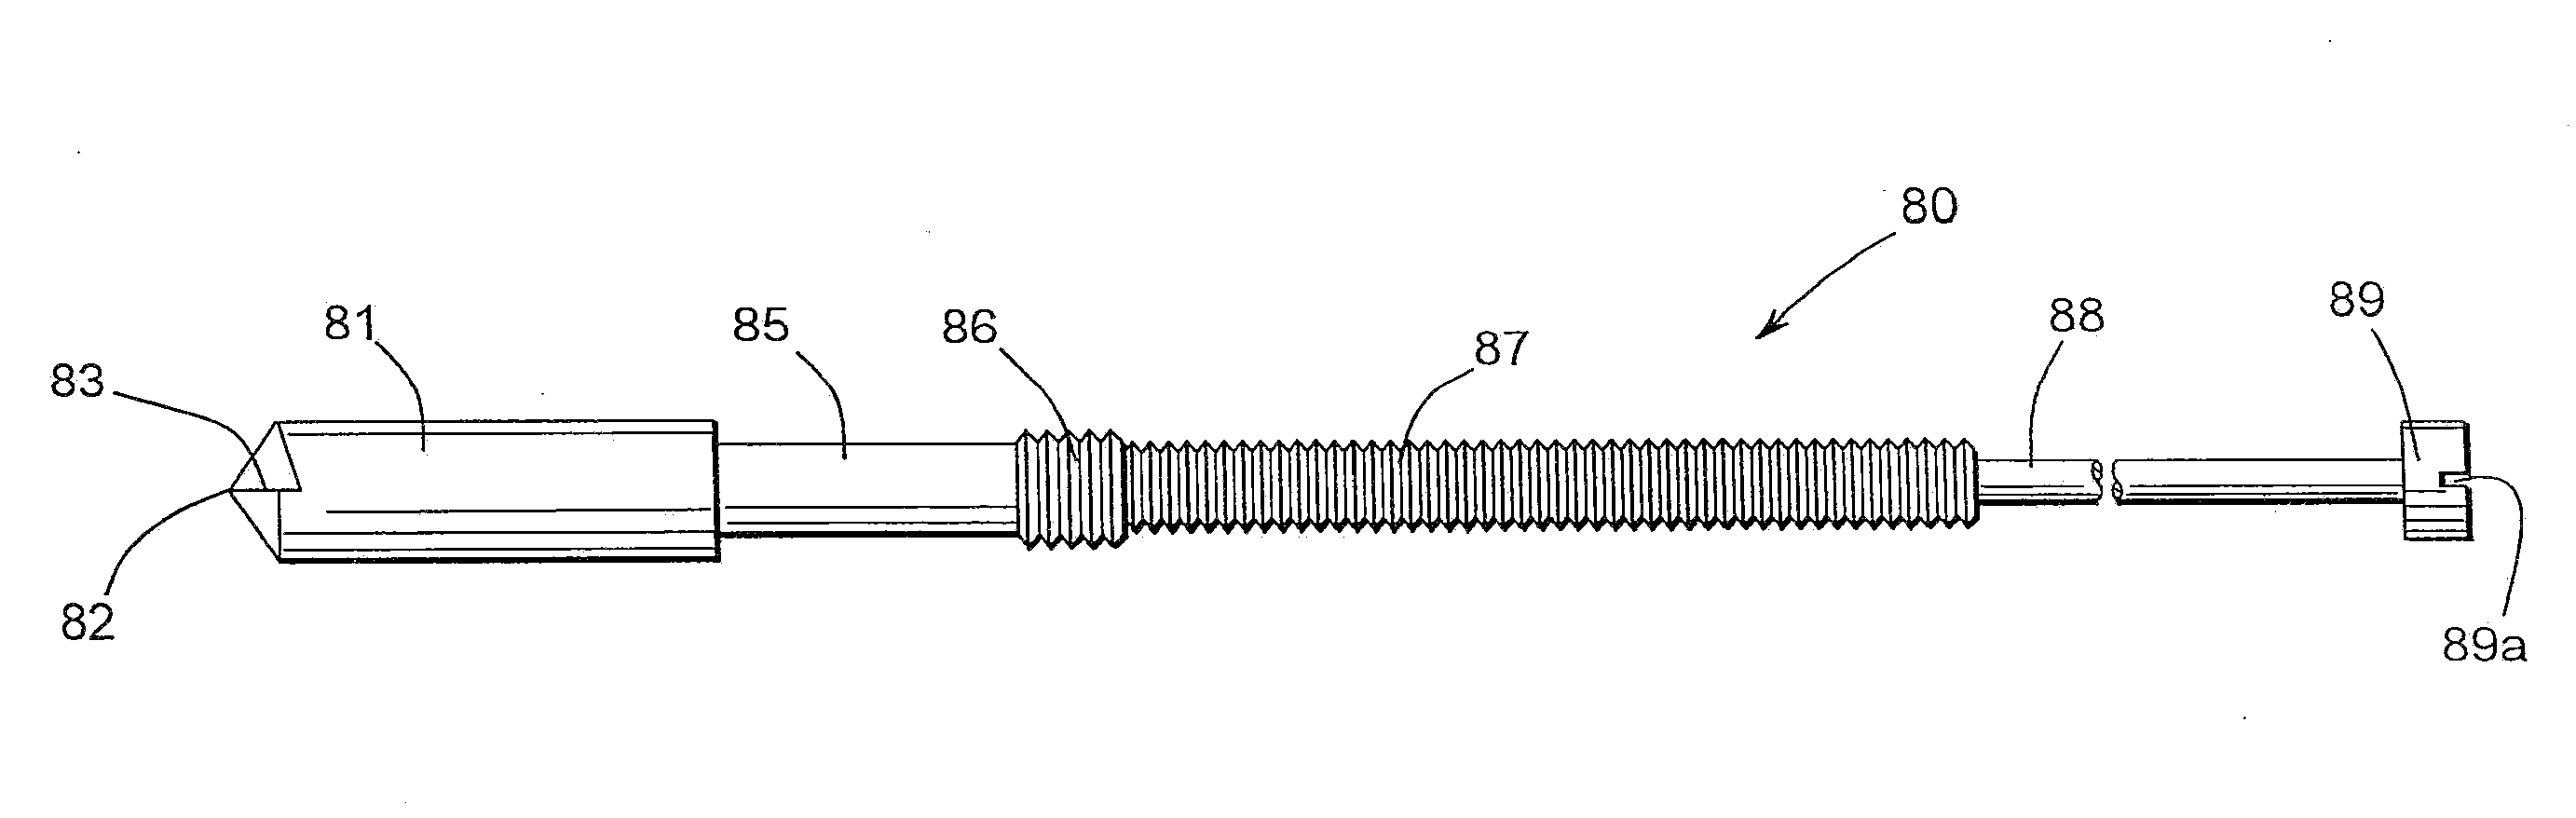 Pedicle screw assembly having a retractable screw tip for facilitating the securement of the pedicle screw assembly to a spinal vertebra